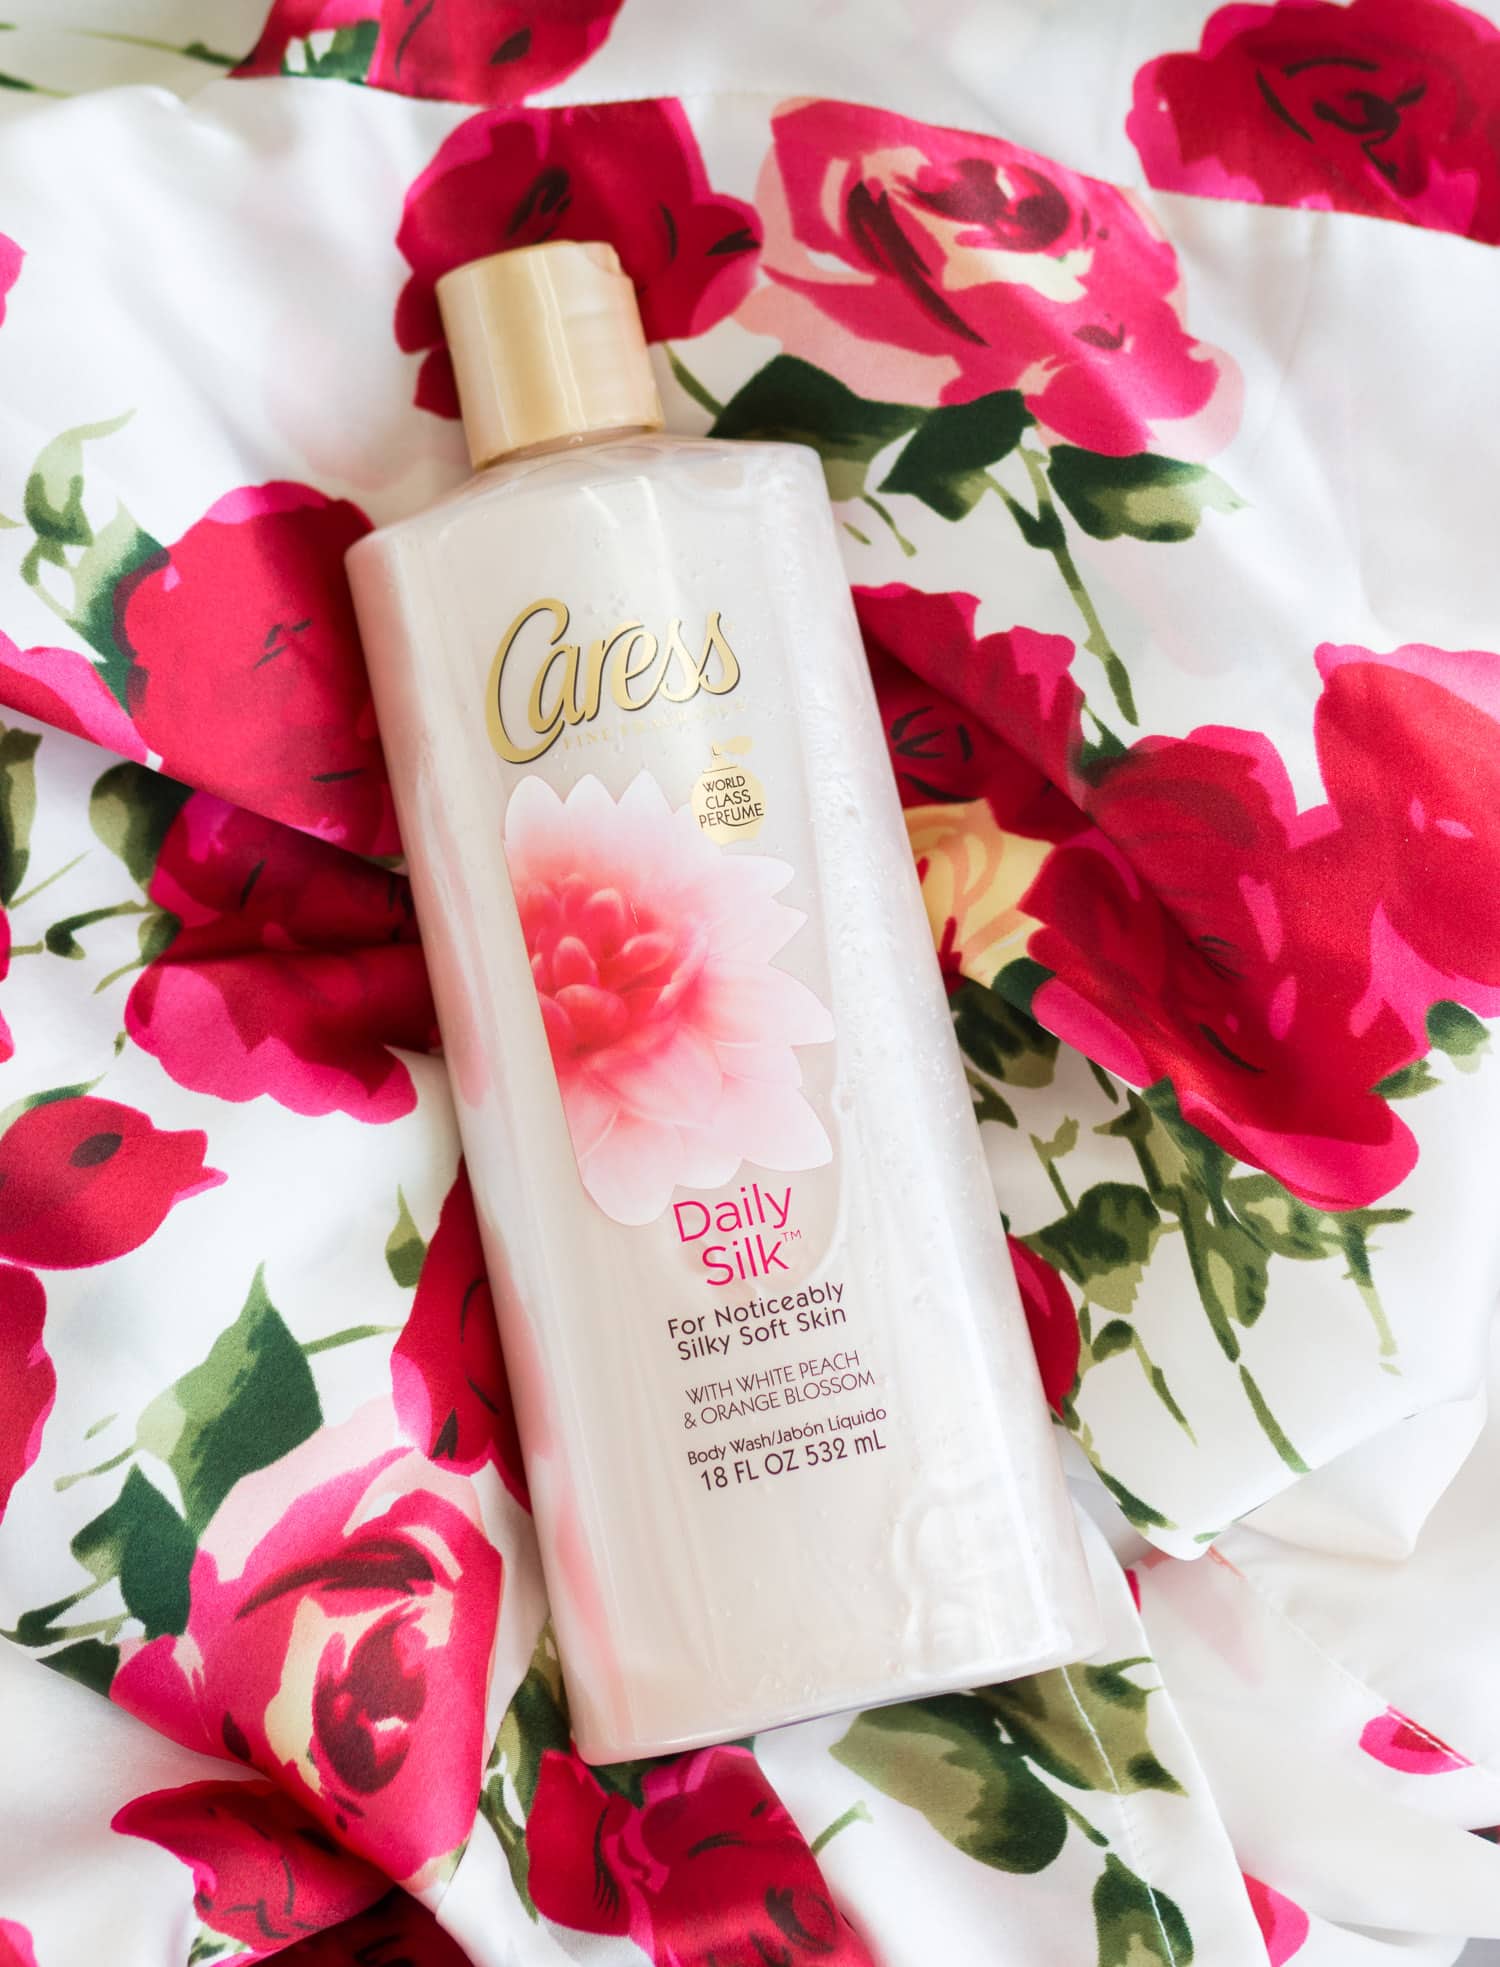 The best body wash for every skin type! | The best drugstore body wash under $5 from Caress + a giveaway to win a $250 Walmart gift card! #MoreThanOneThing sponsored by Walmart | @walmart   | Caress Daily Silk body wash | affordable beauty, drugstore beauty, beauty review, bath and body products, shower gel, bath products, shower products, best of beauty, beauty under $5, best of beauty under $5, Florida beauty blogger Ashley Brooke Nicholas